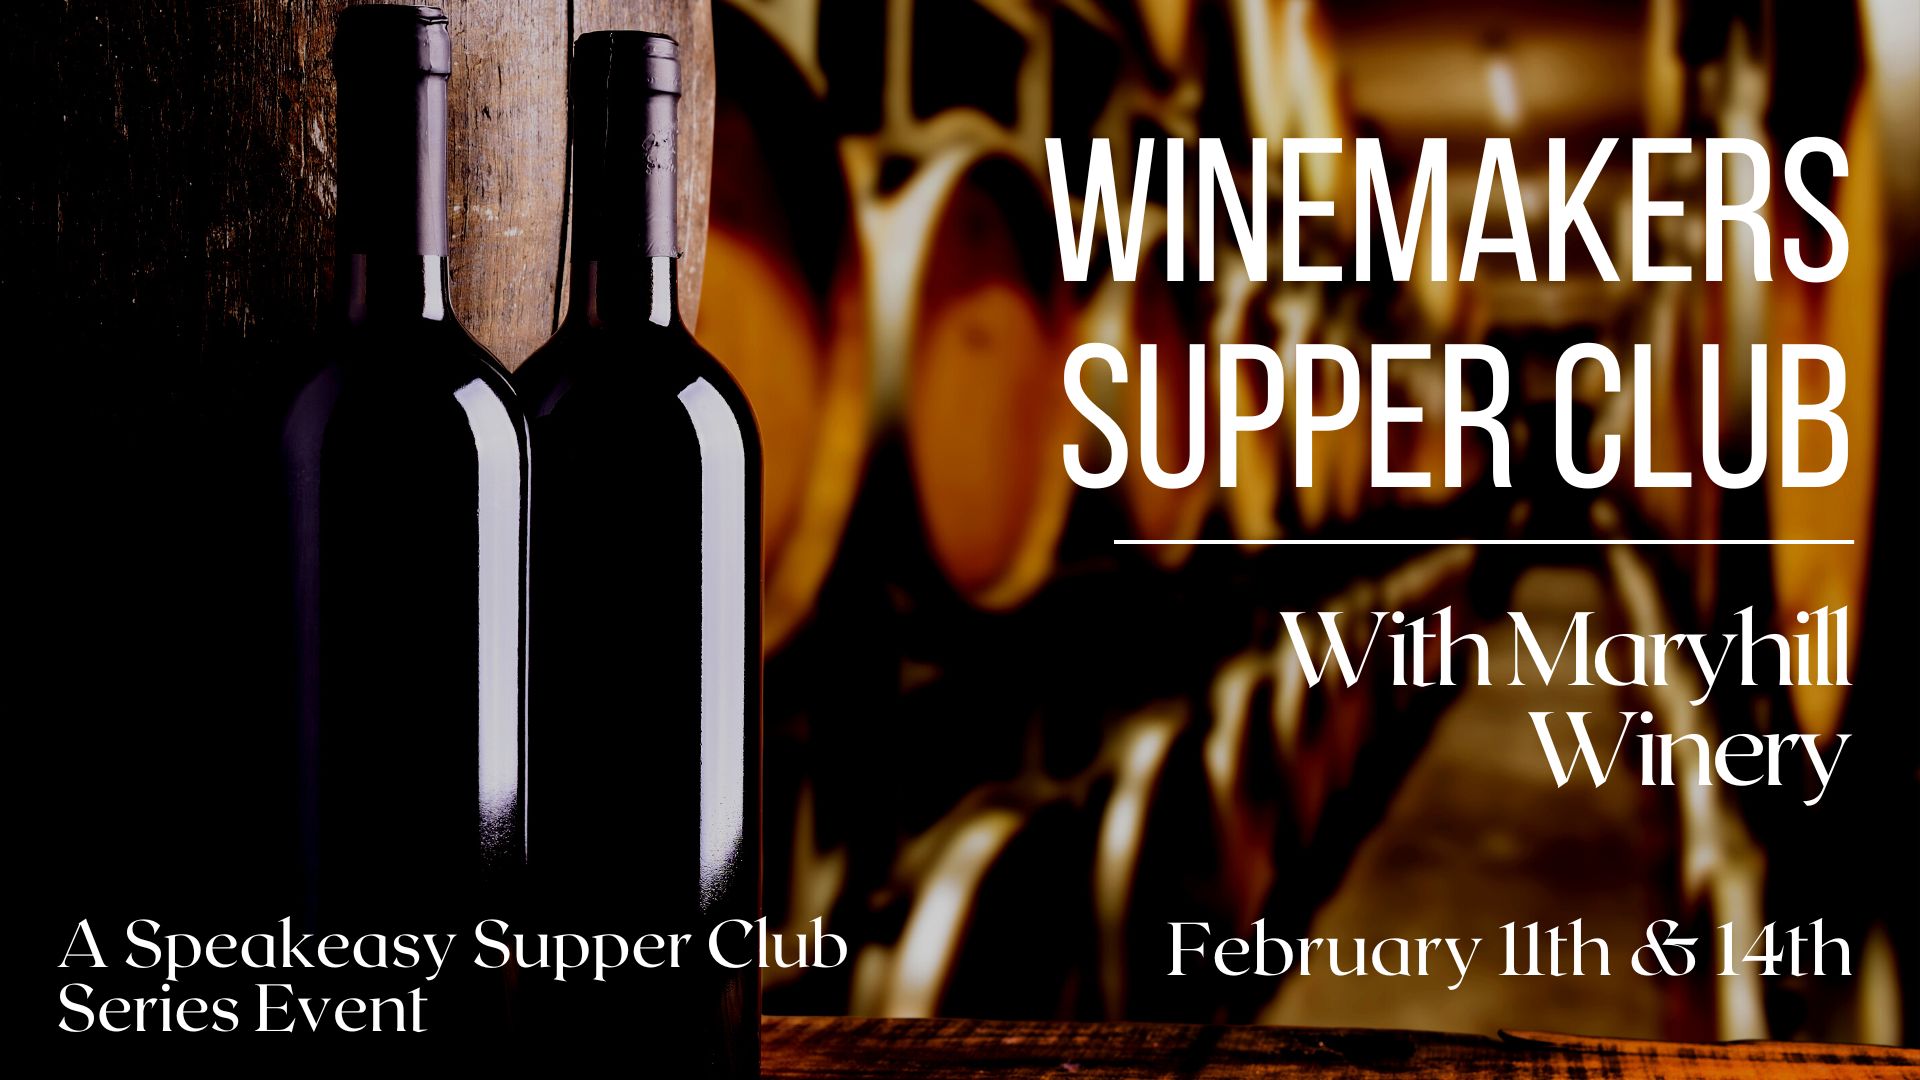 Winemakers Supper Club with Maryhill Winery